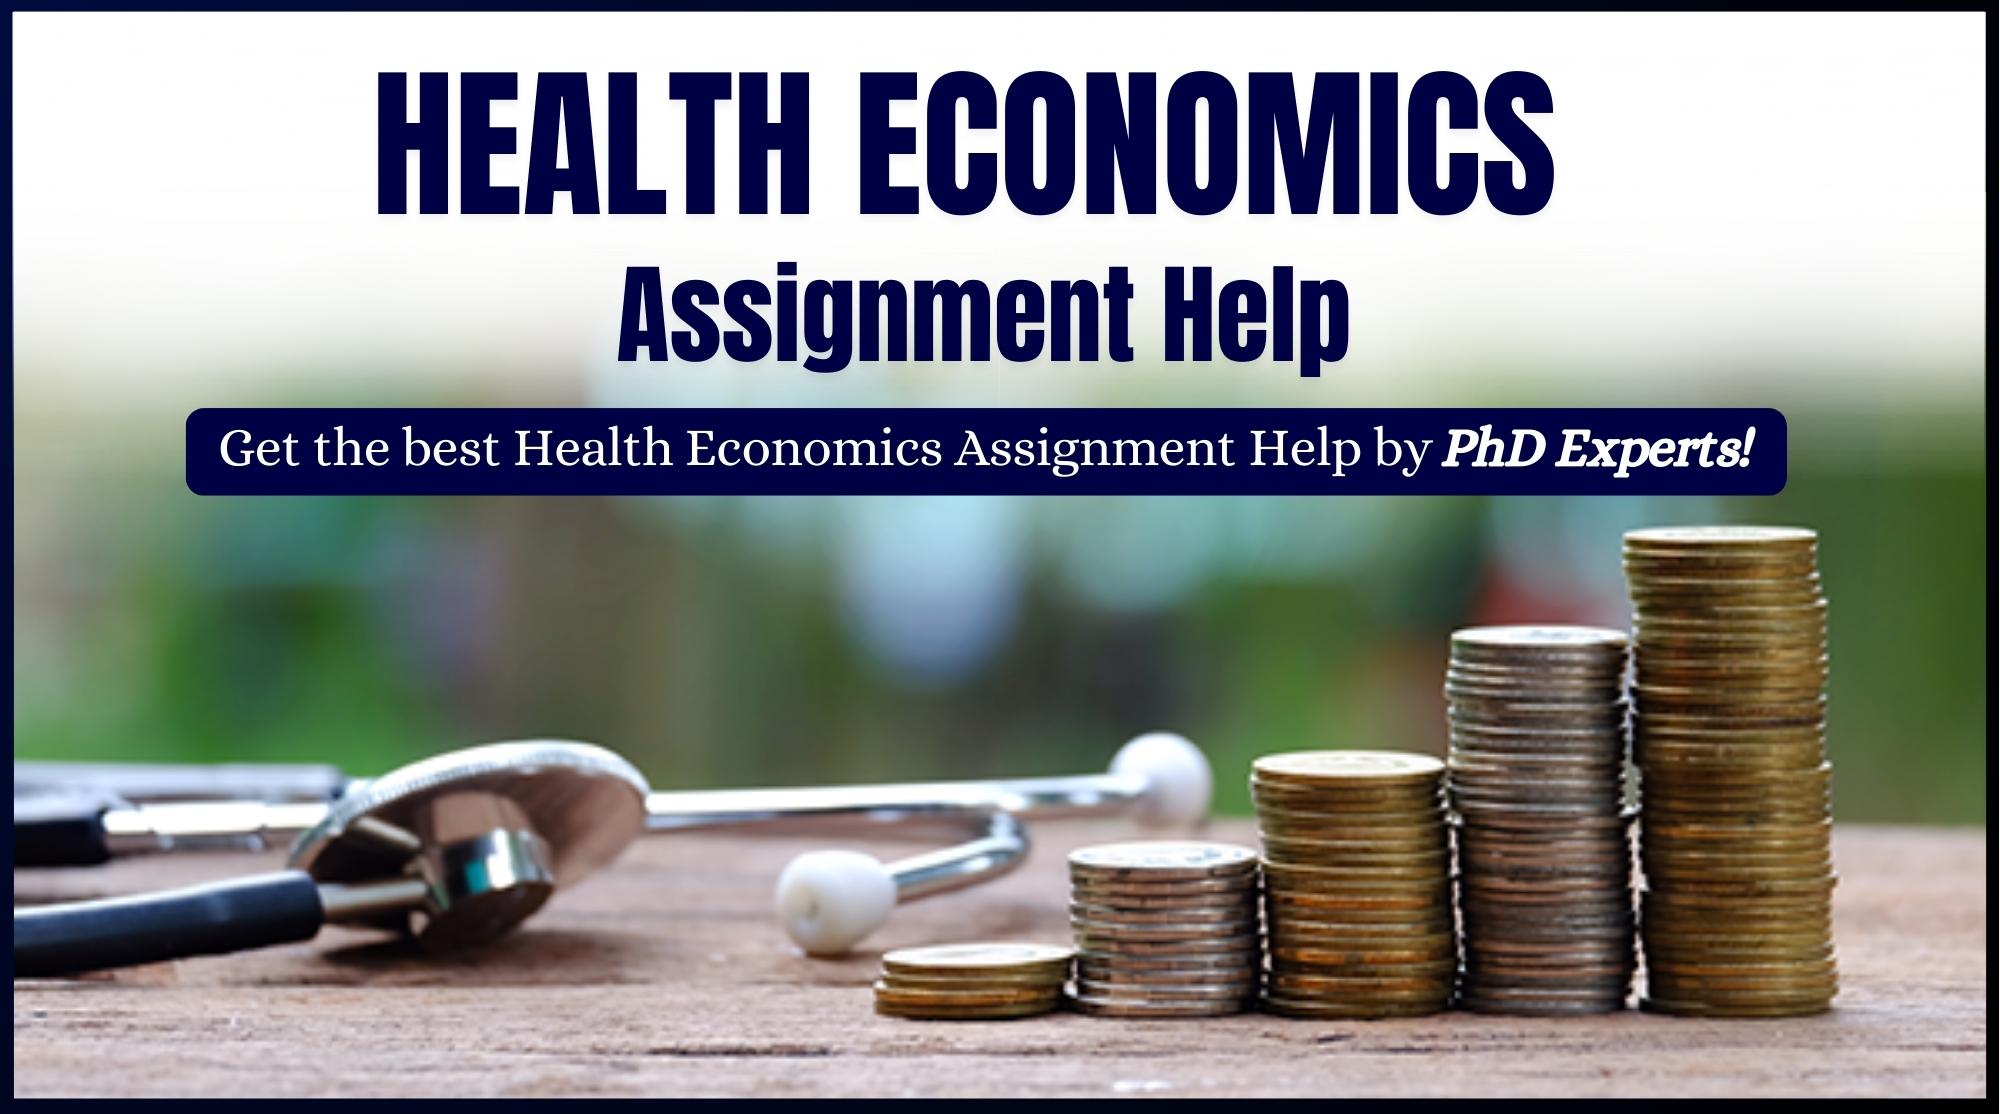 Health Economics Assignment Help by Ph.D. Experts at BEWS